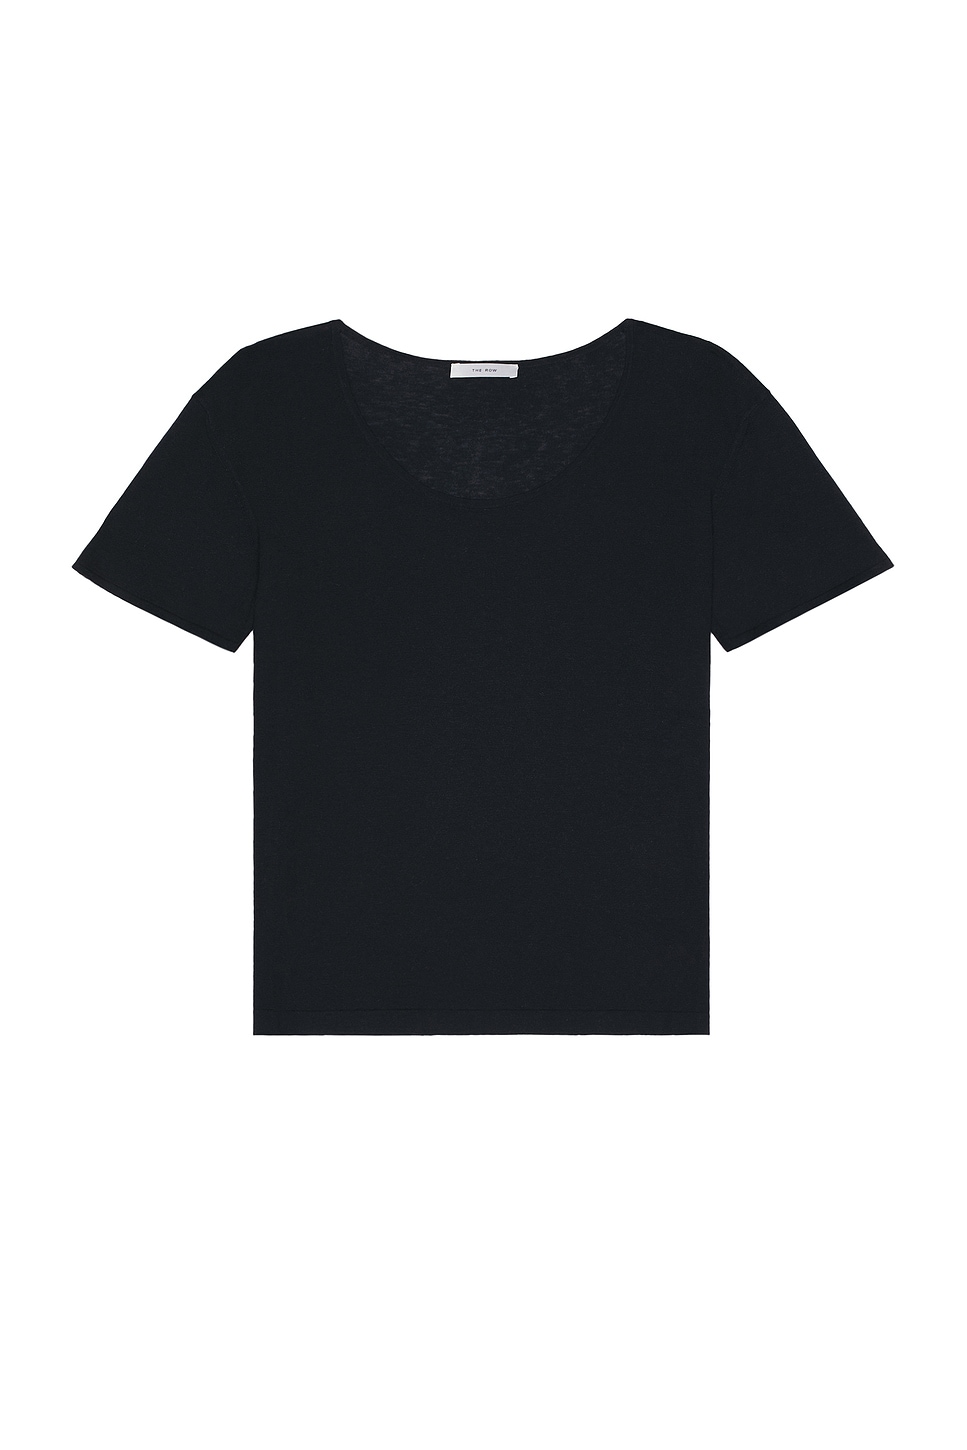 Image 1 of The Row Floripa Top in MIDNIGHT